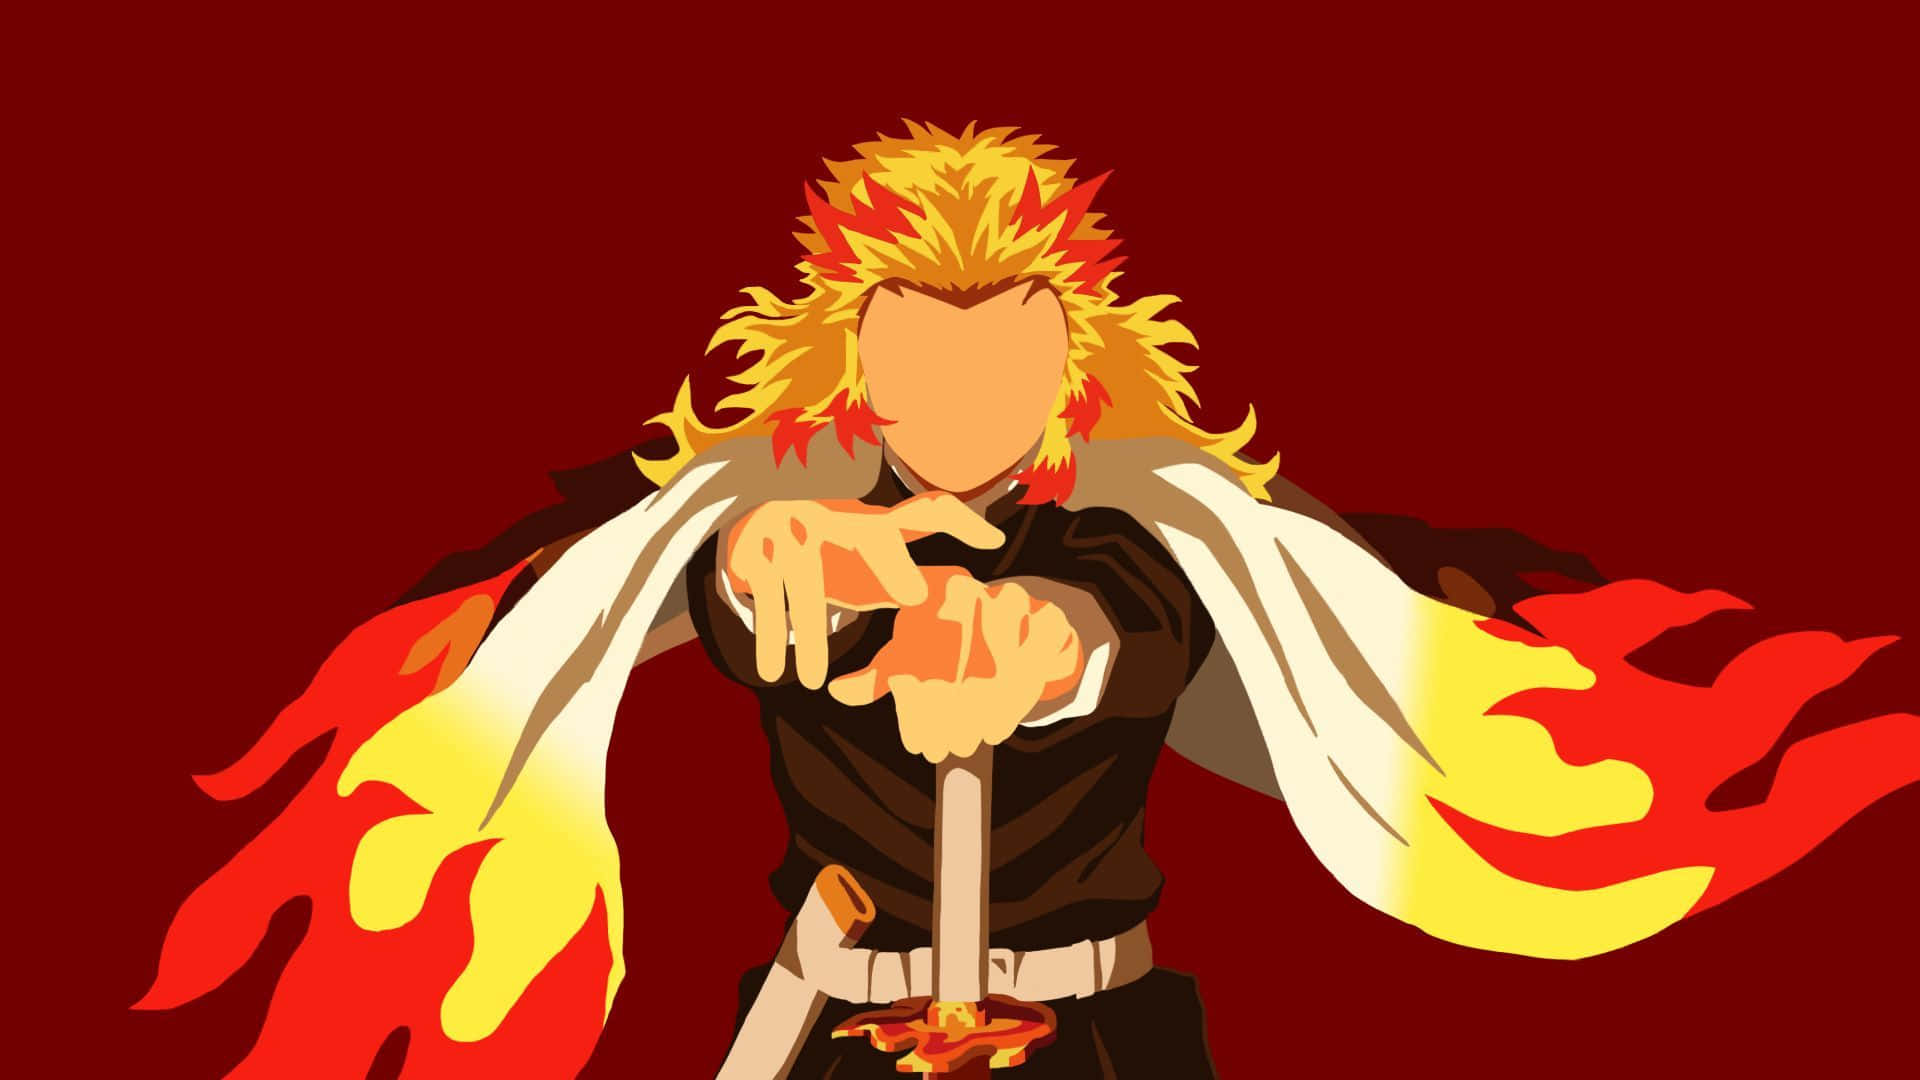 Rengoku, the Flame Hashira, in a dramatic pose on a fiery background.